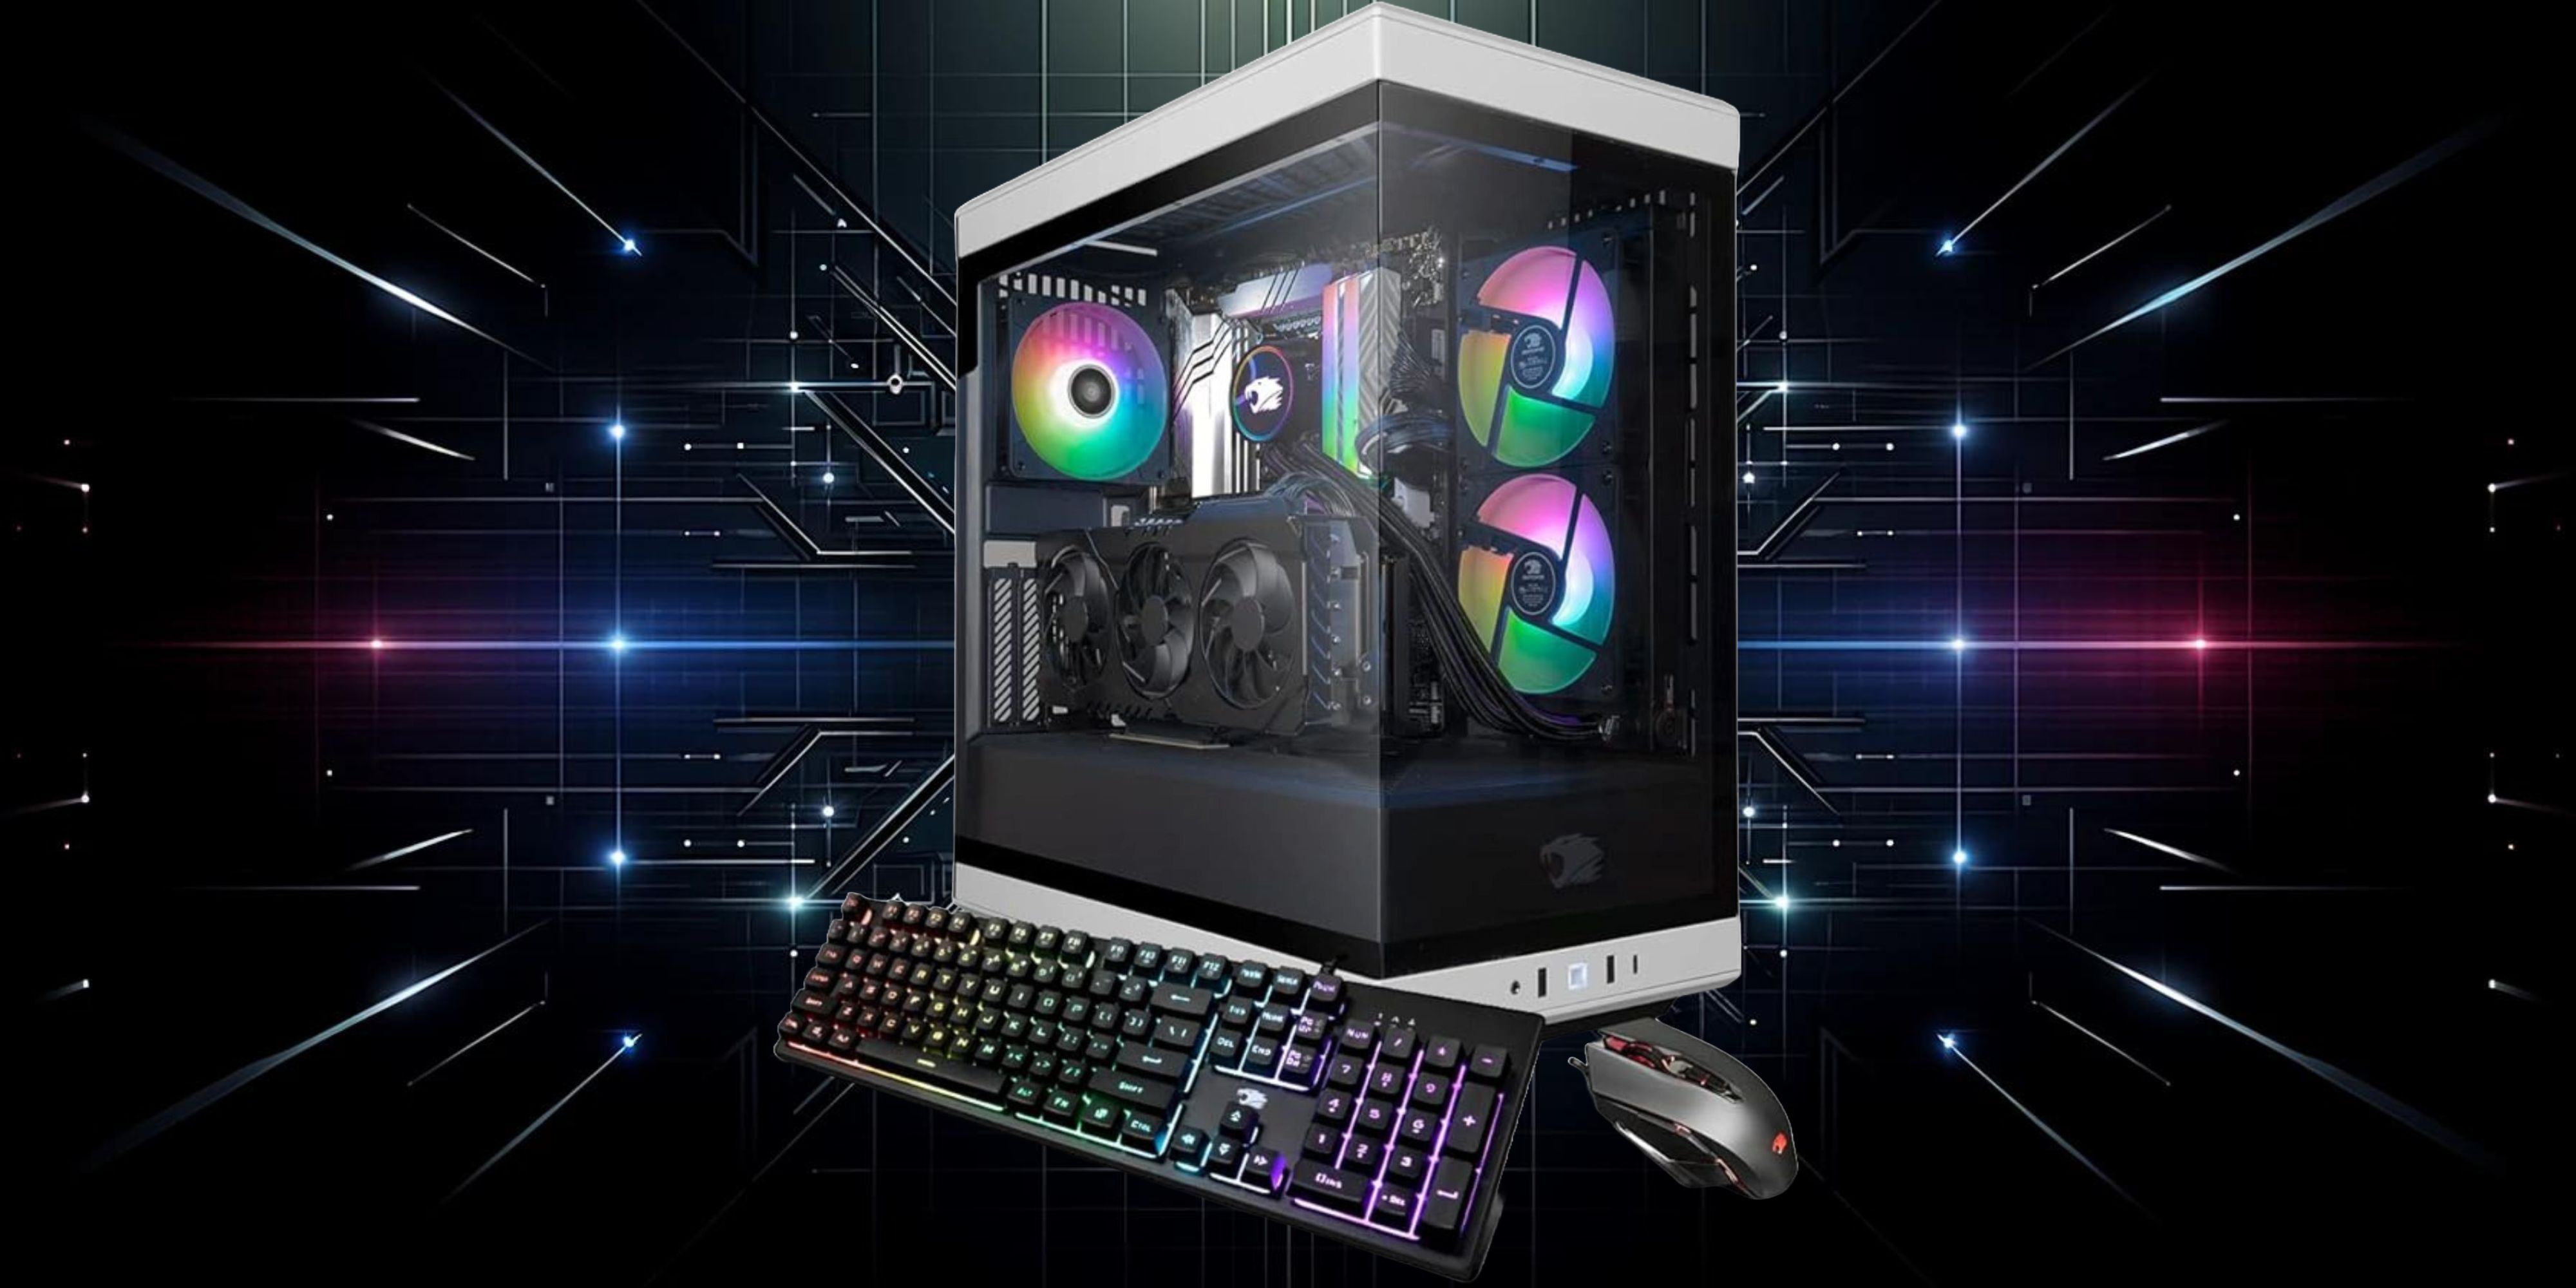 iBUYPOWER Announces Special Discounts On Premium Gaming PCs During Amazon Gaming Week